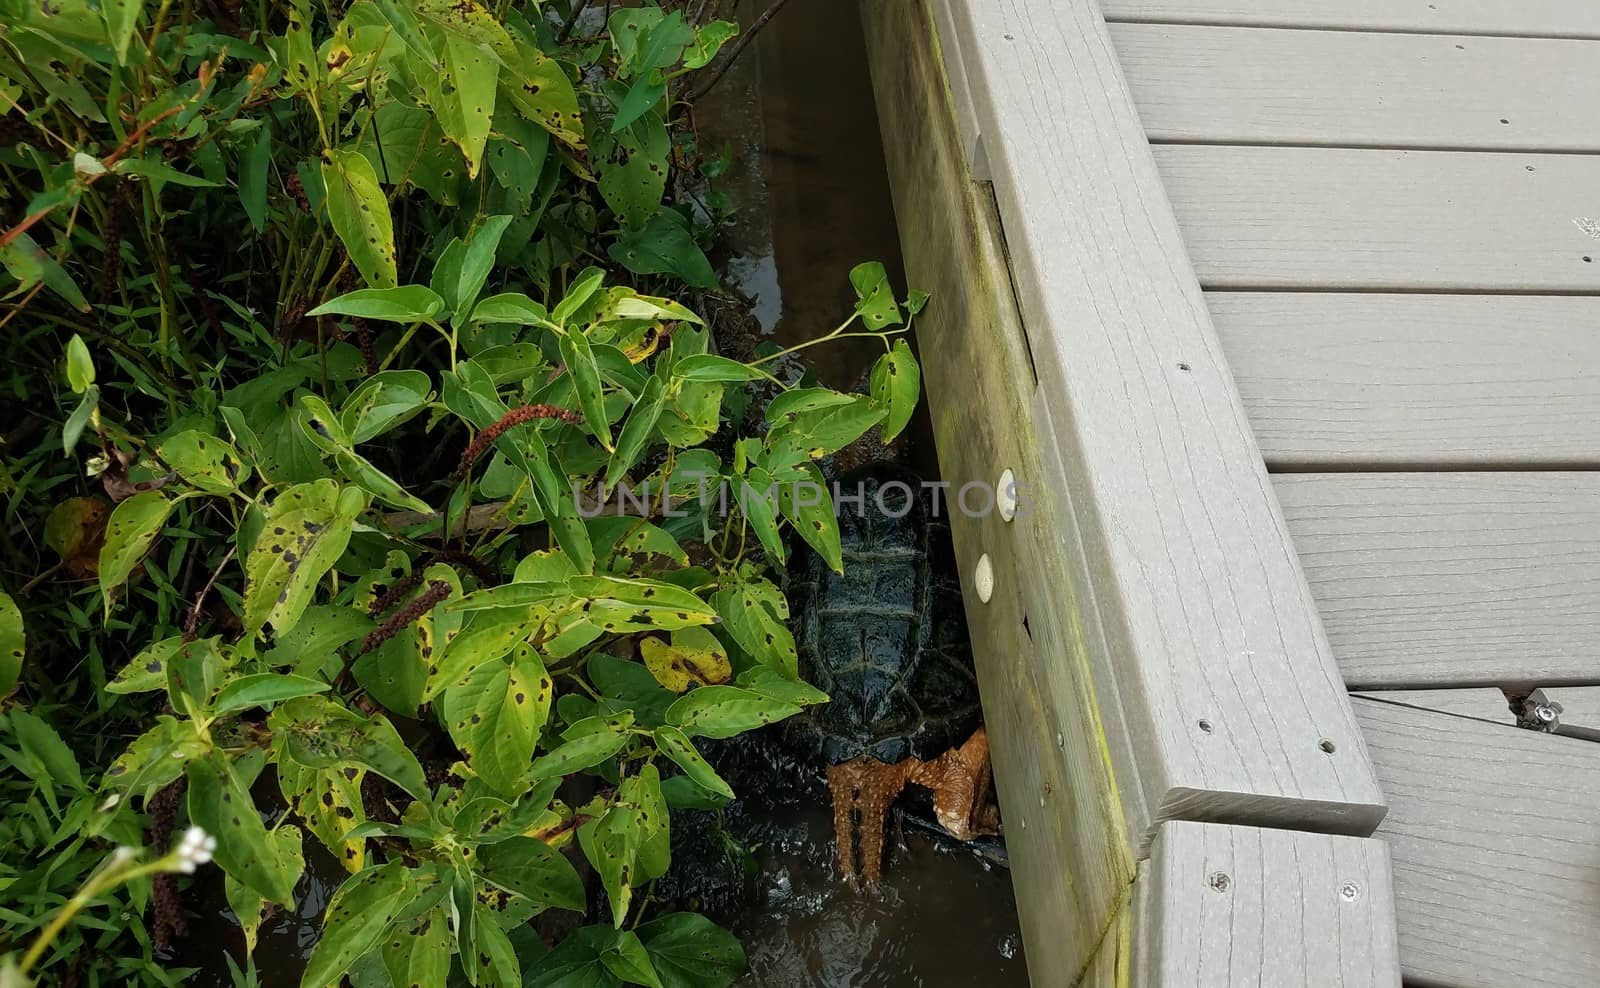 snapping turtle with green plants and wood boardwalk by stockphotofan1